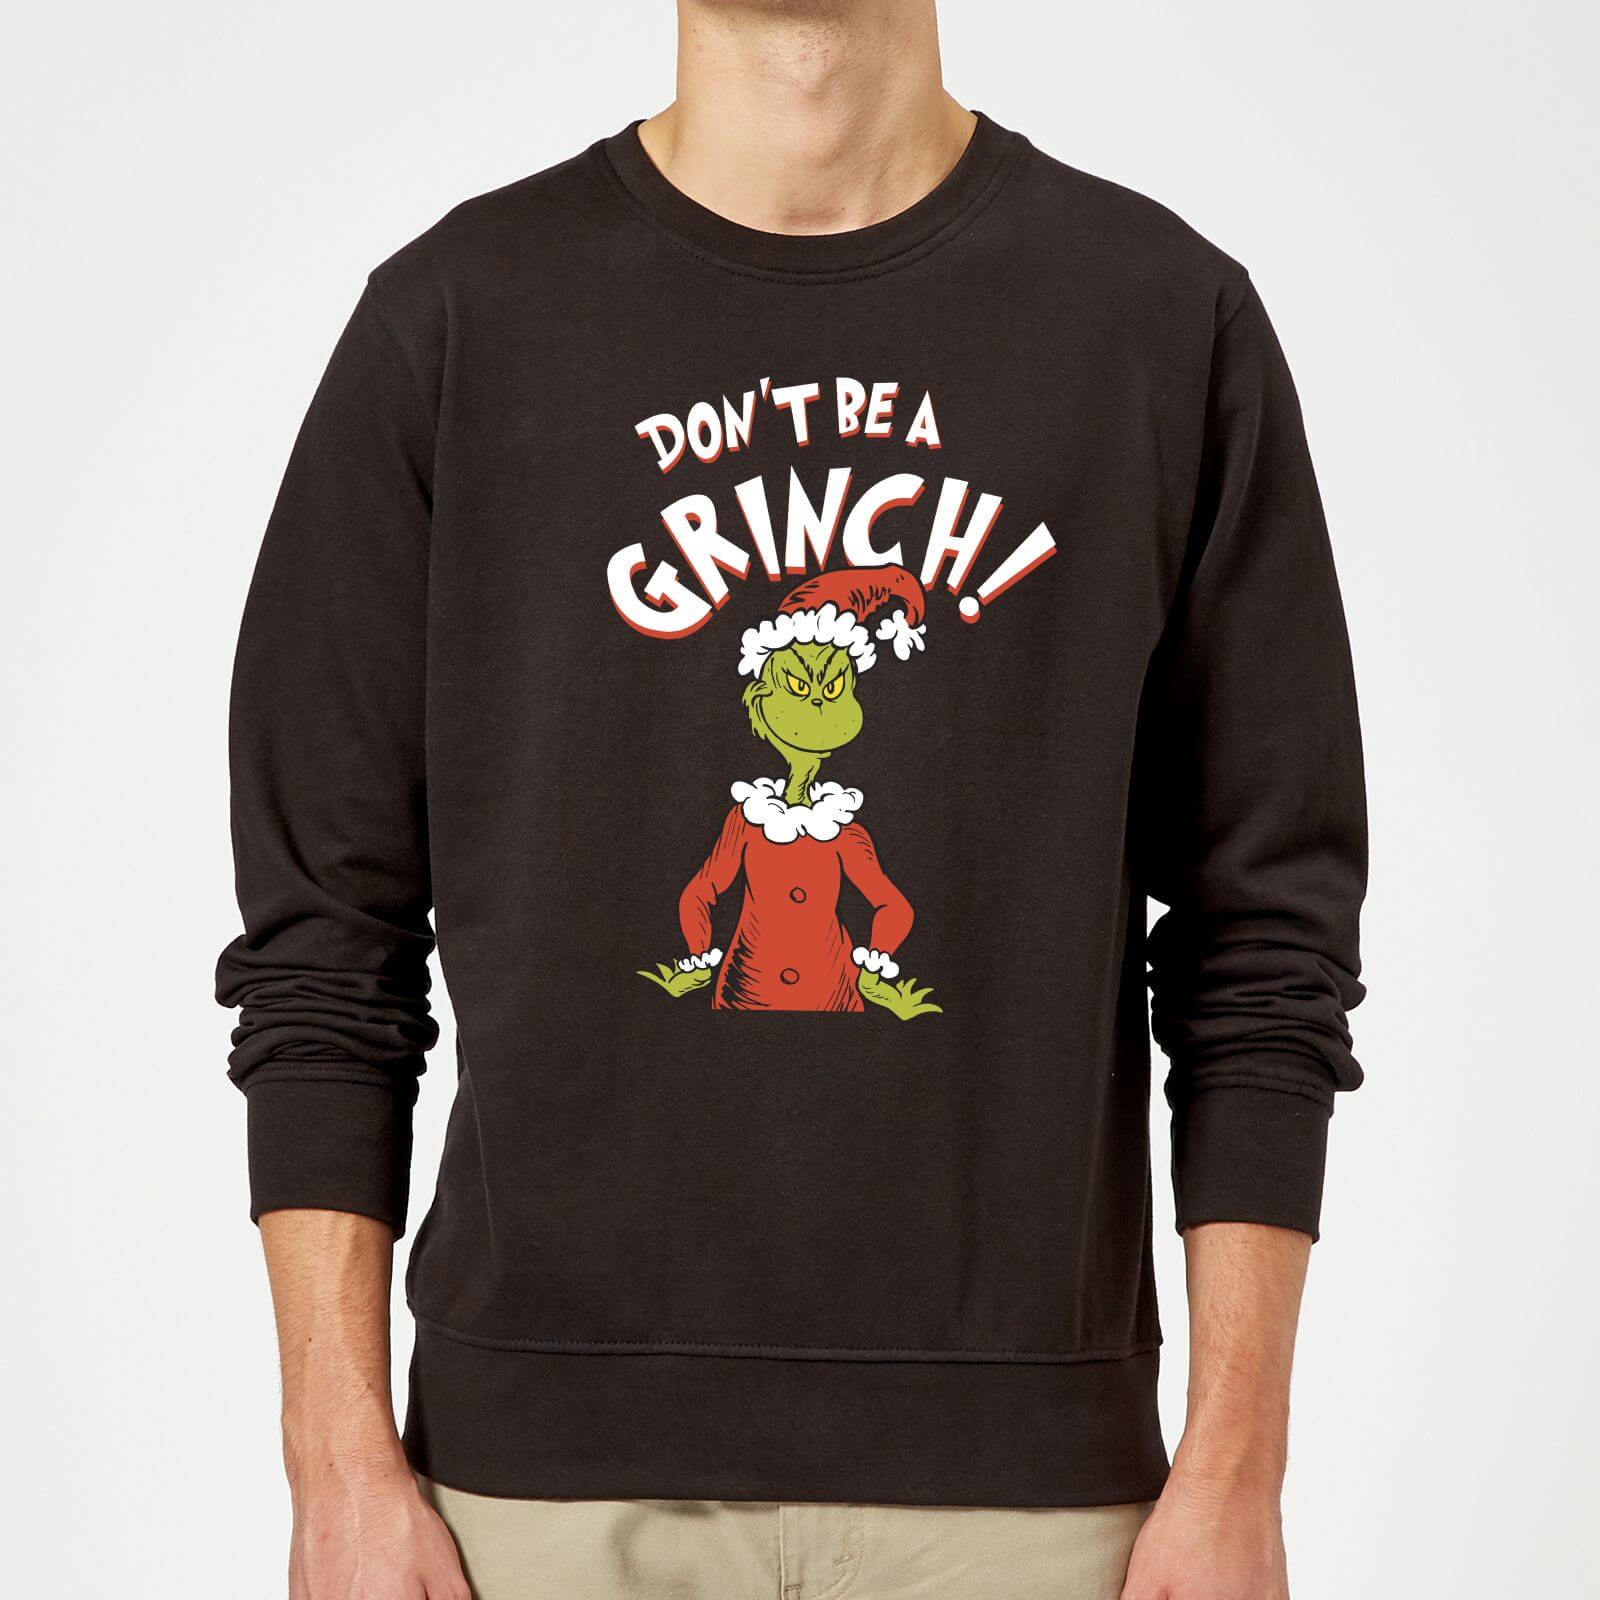 The Grinch Dont Be A Grinch Christmas Sweatshirt - Black - L